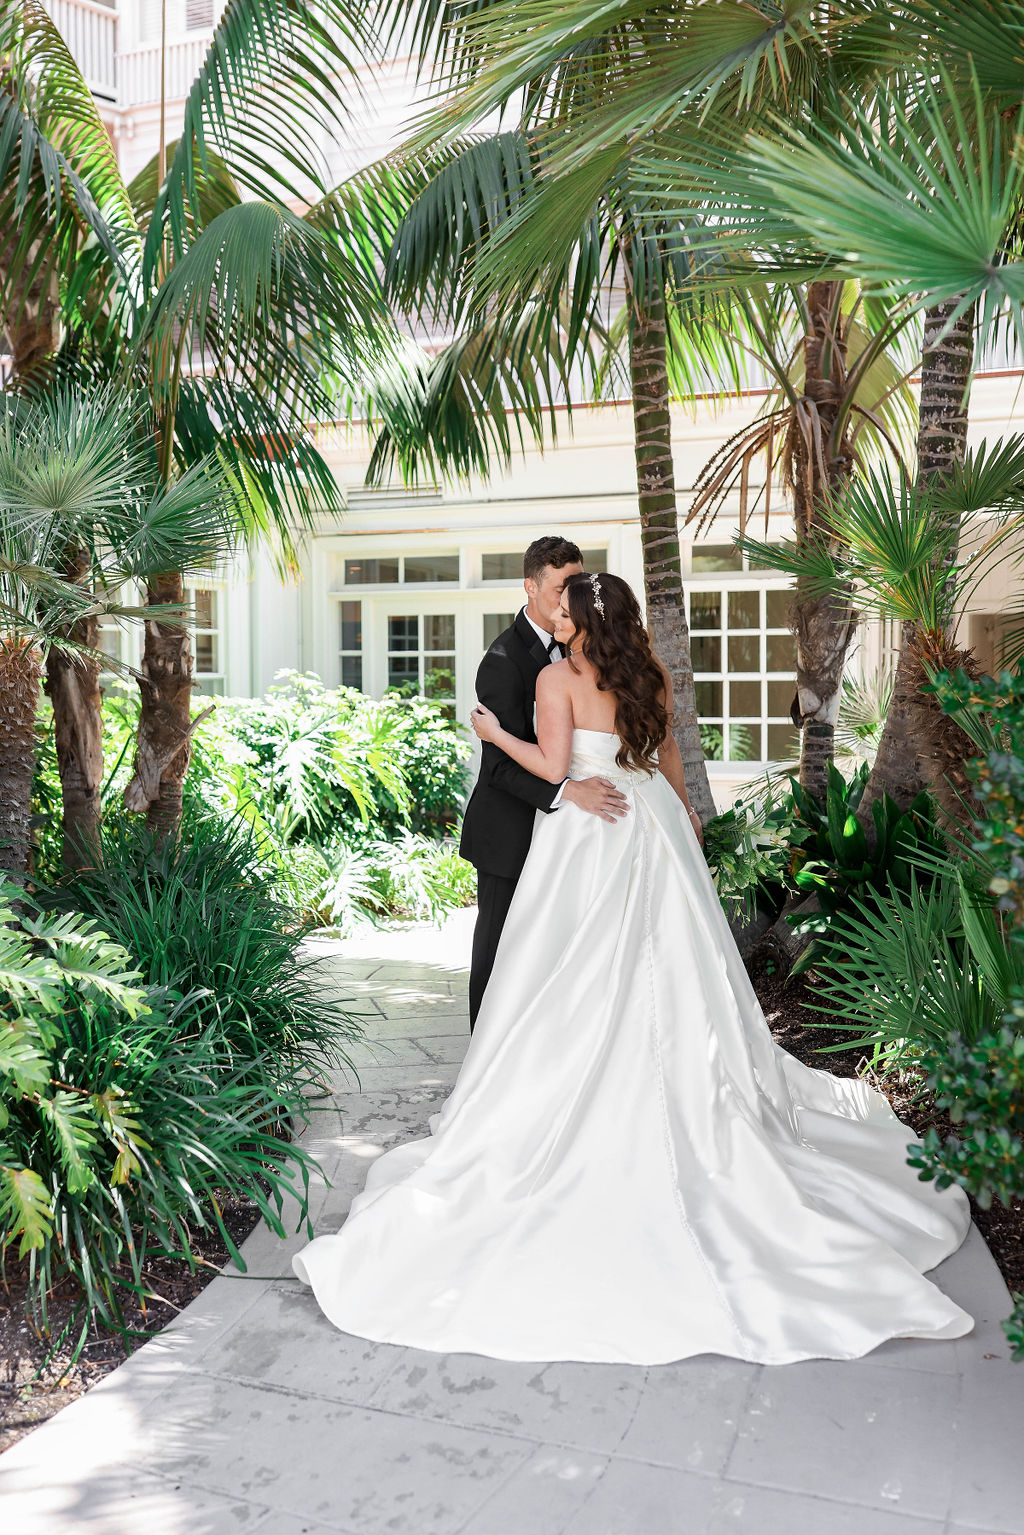 Bride and Groom embracing during their first look on their wedding day as they stand in the garden with palm trees surrounding them at the Hotel Del Coronado in San Diego California | Photo by Sarah Block Photography.